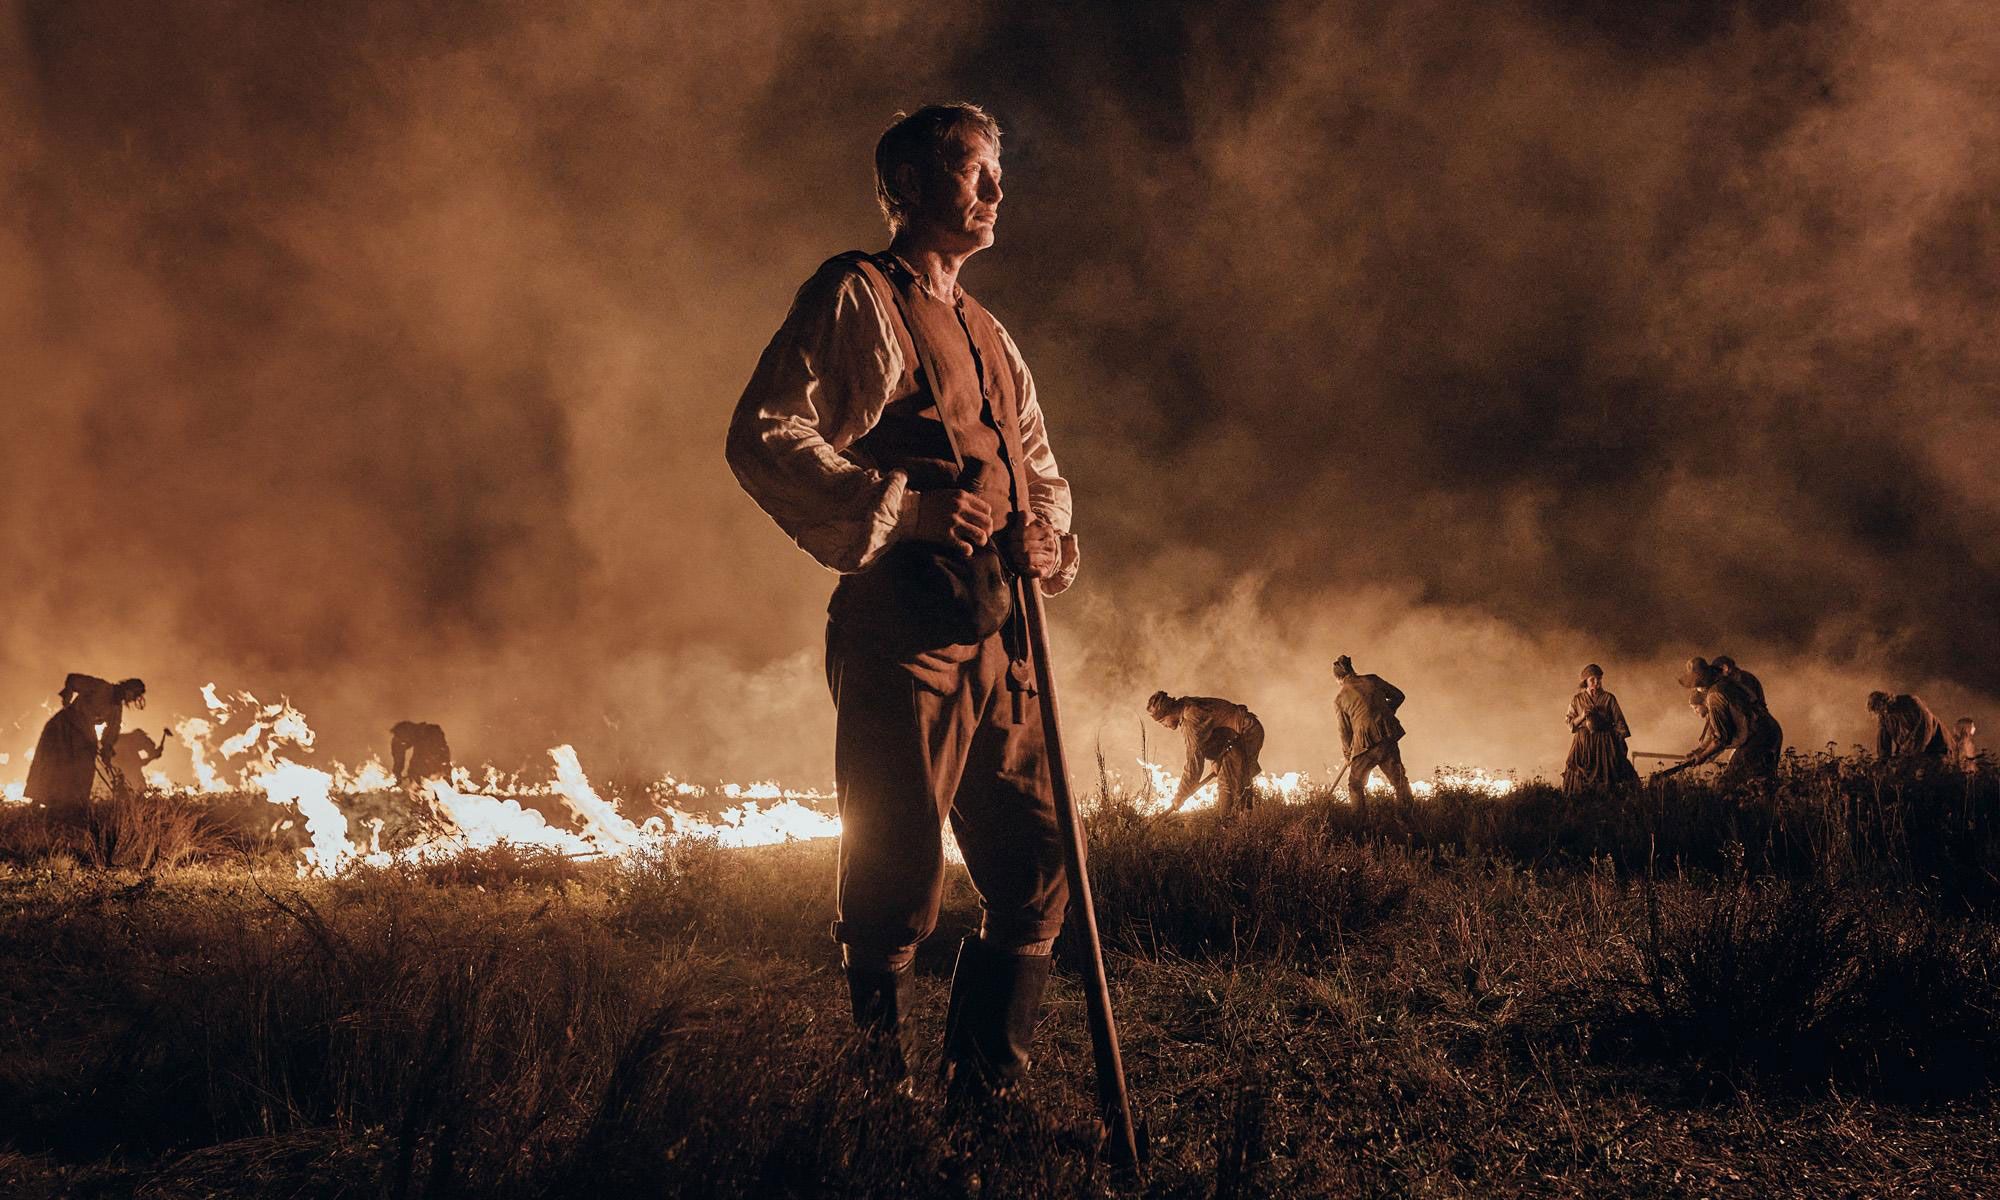 The Promised Land' Review: Mads Mikkelsen Is Perfect